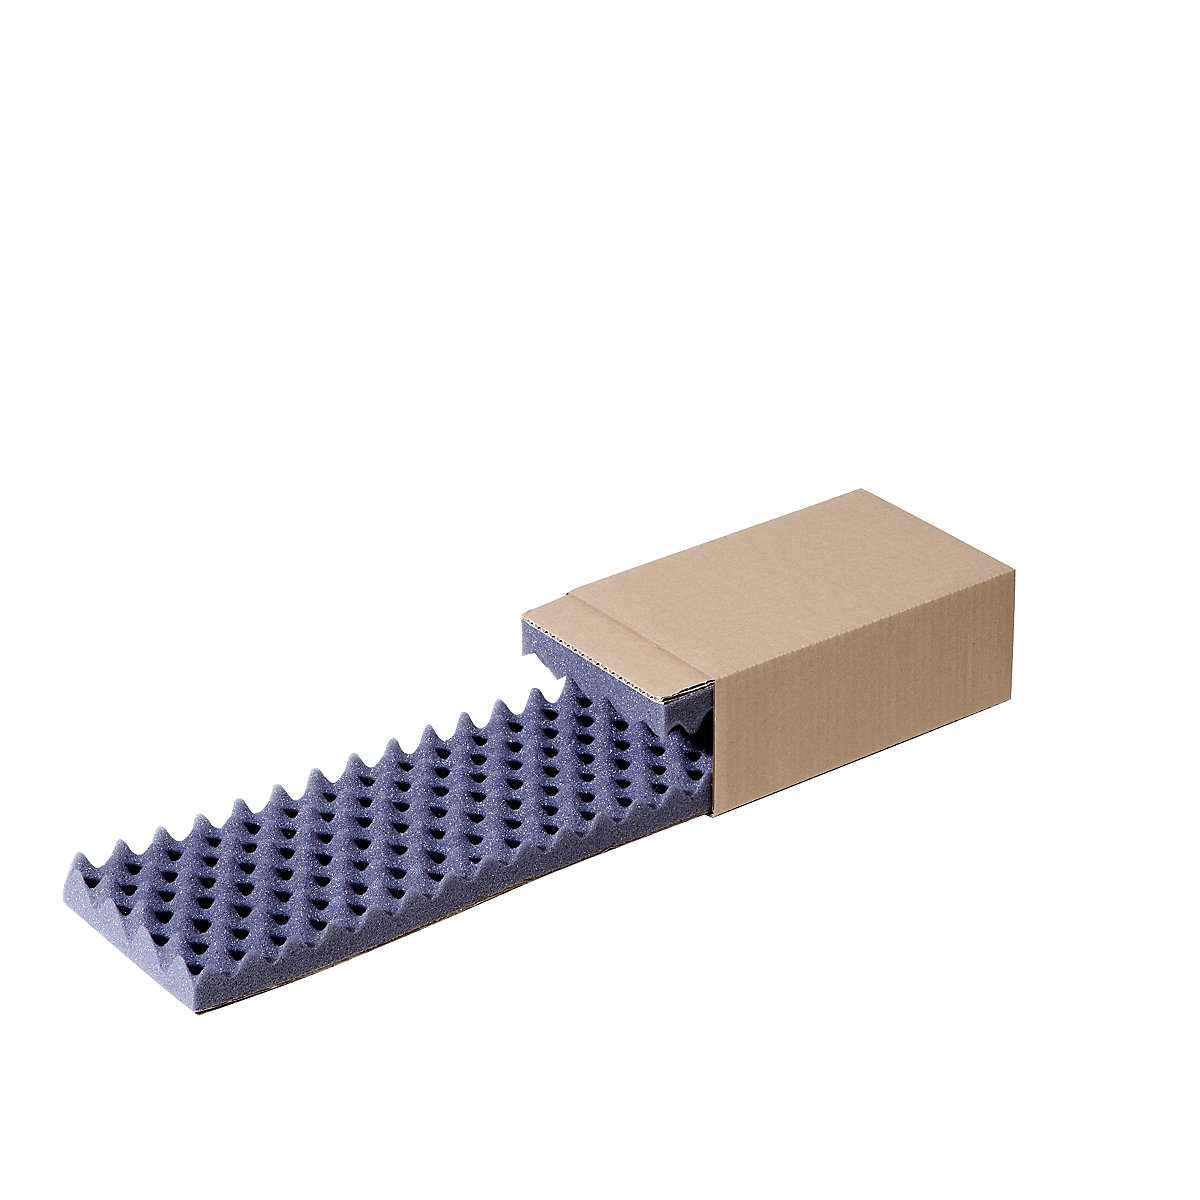 Slide boxes, internal part FEFCO 0907, external part FEFCO 0503, padded, internal dimensions 250 x 140 x 80 mm, pack of 50